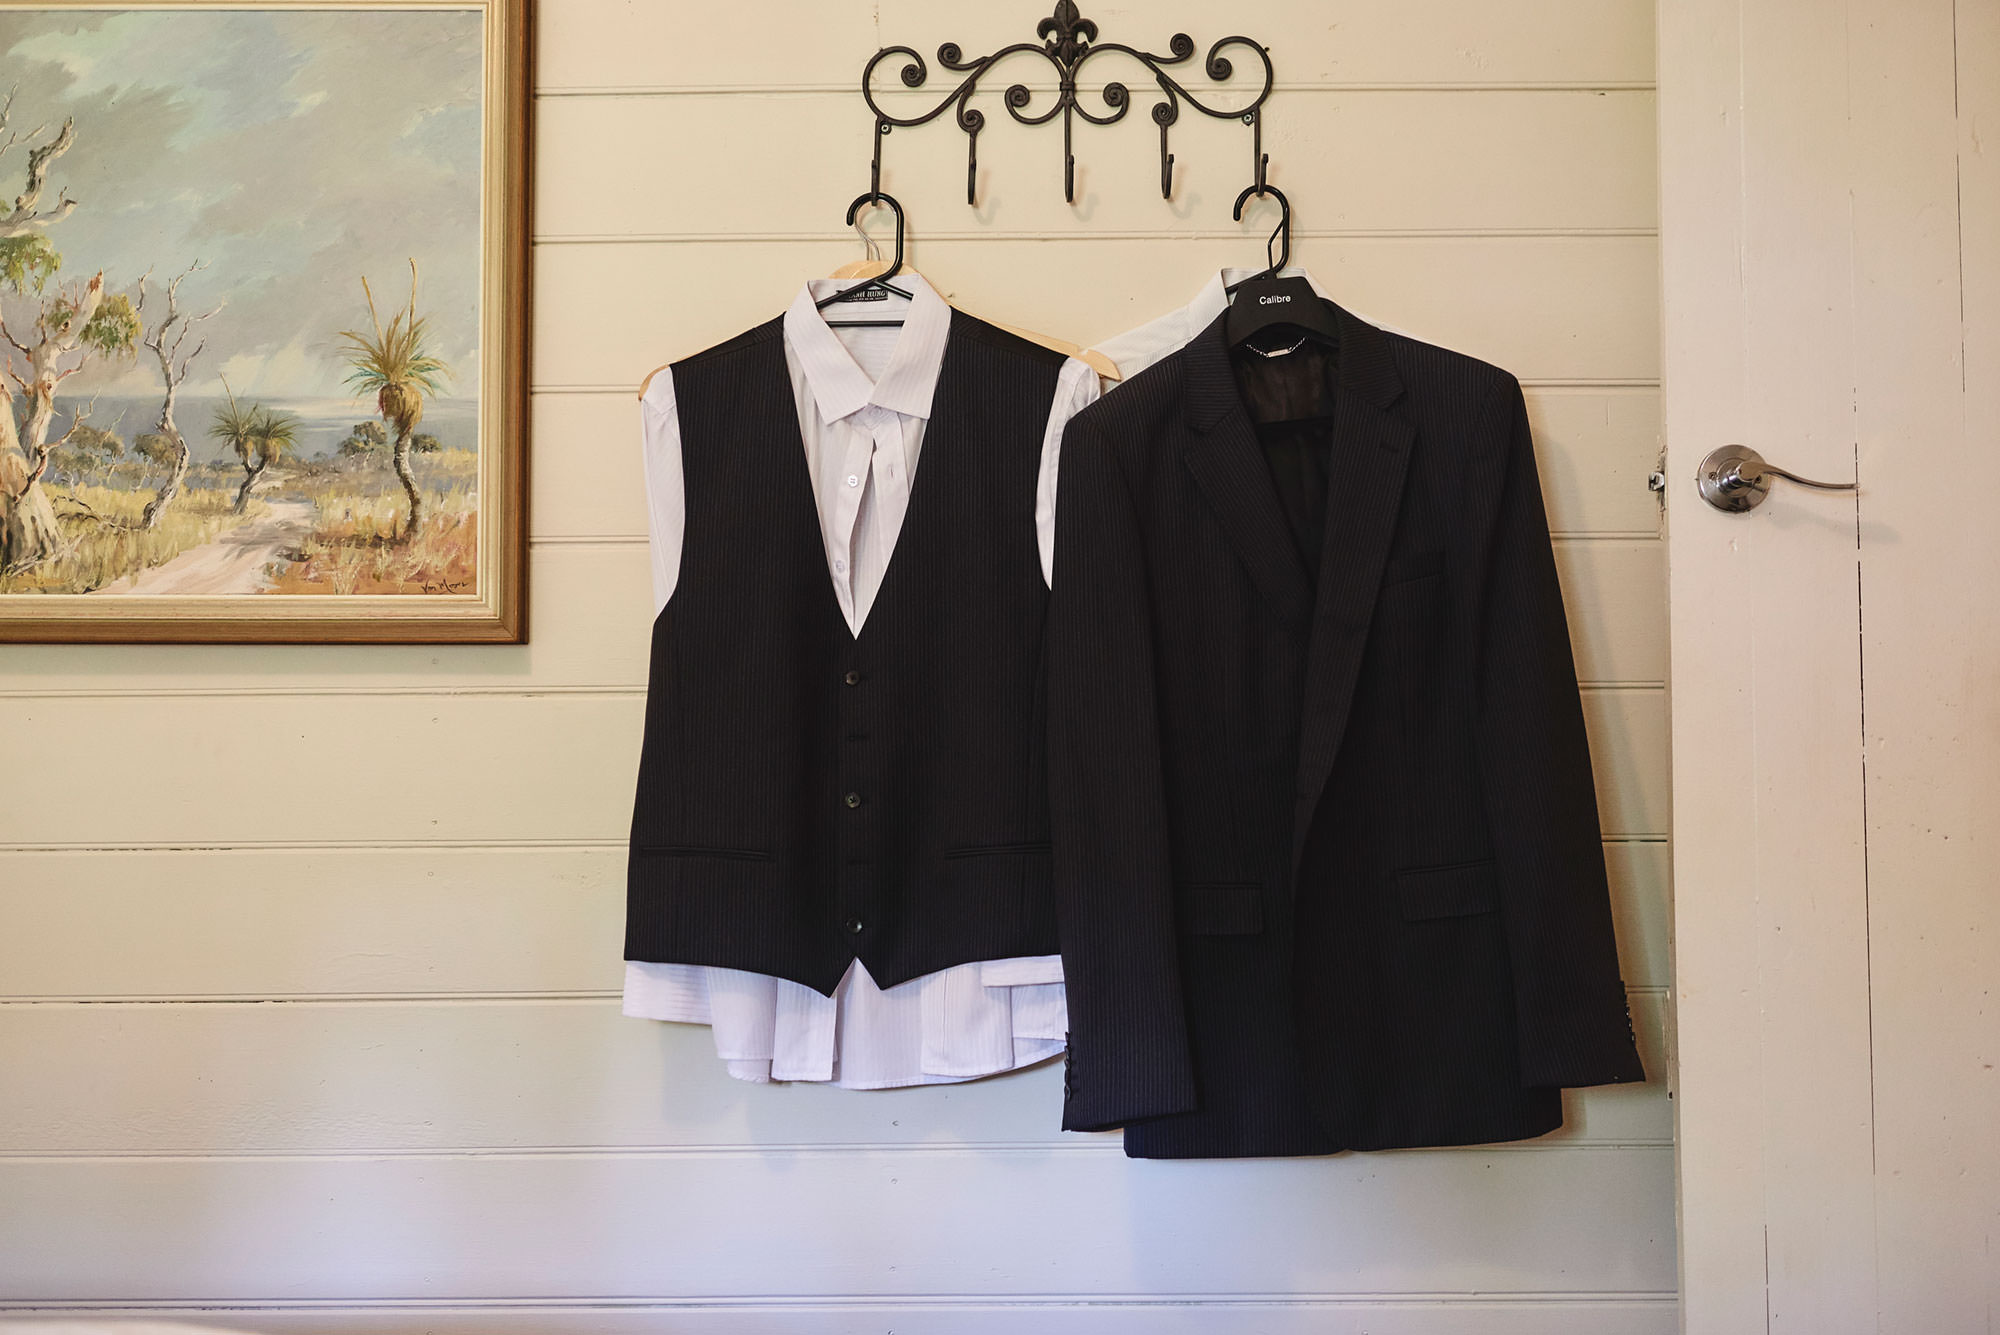 Grooms suit and shirt ready to put on